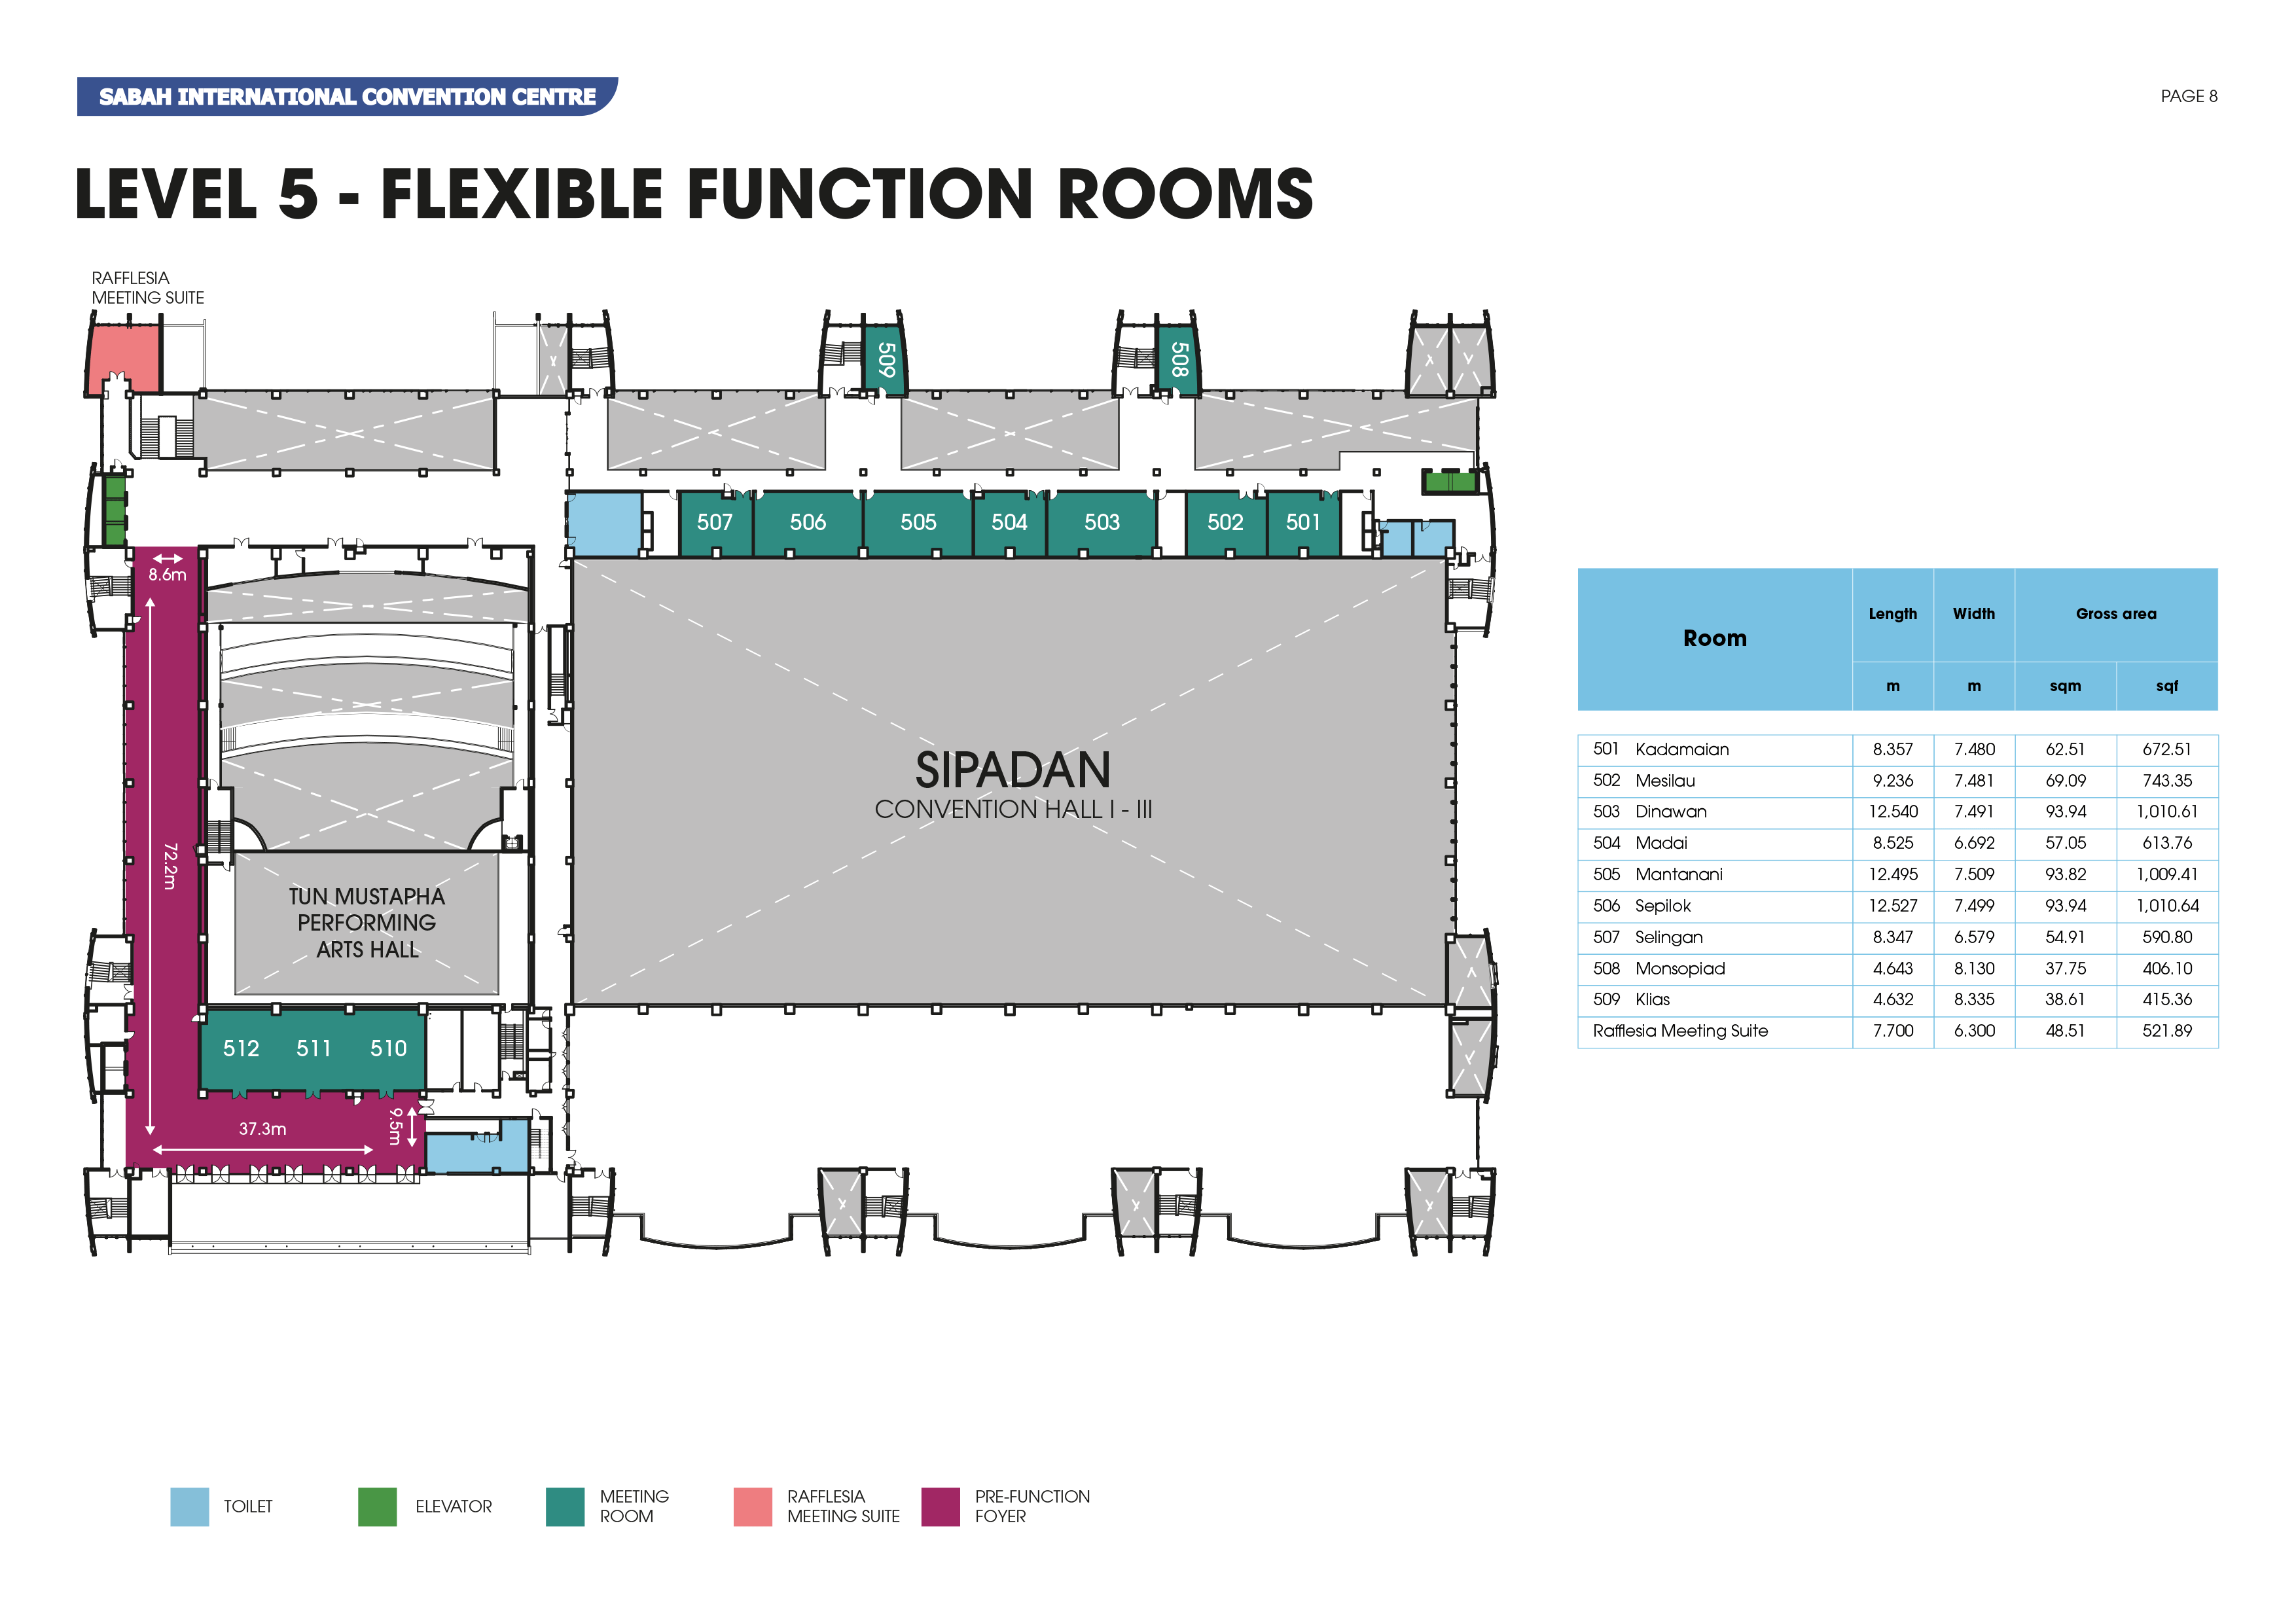 Level 5 - Flexible Function Rooms